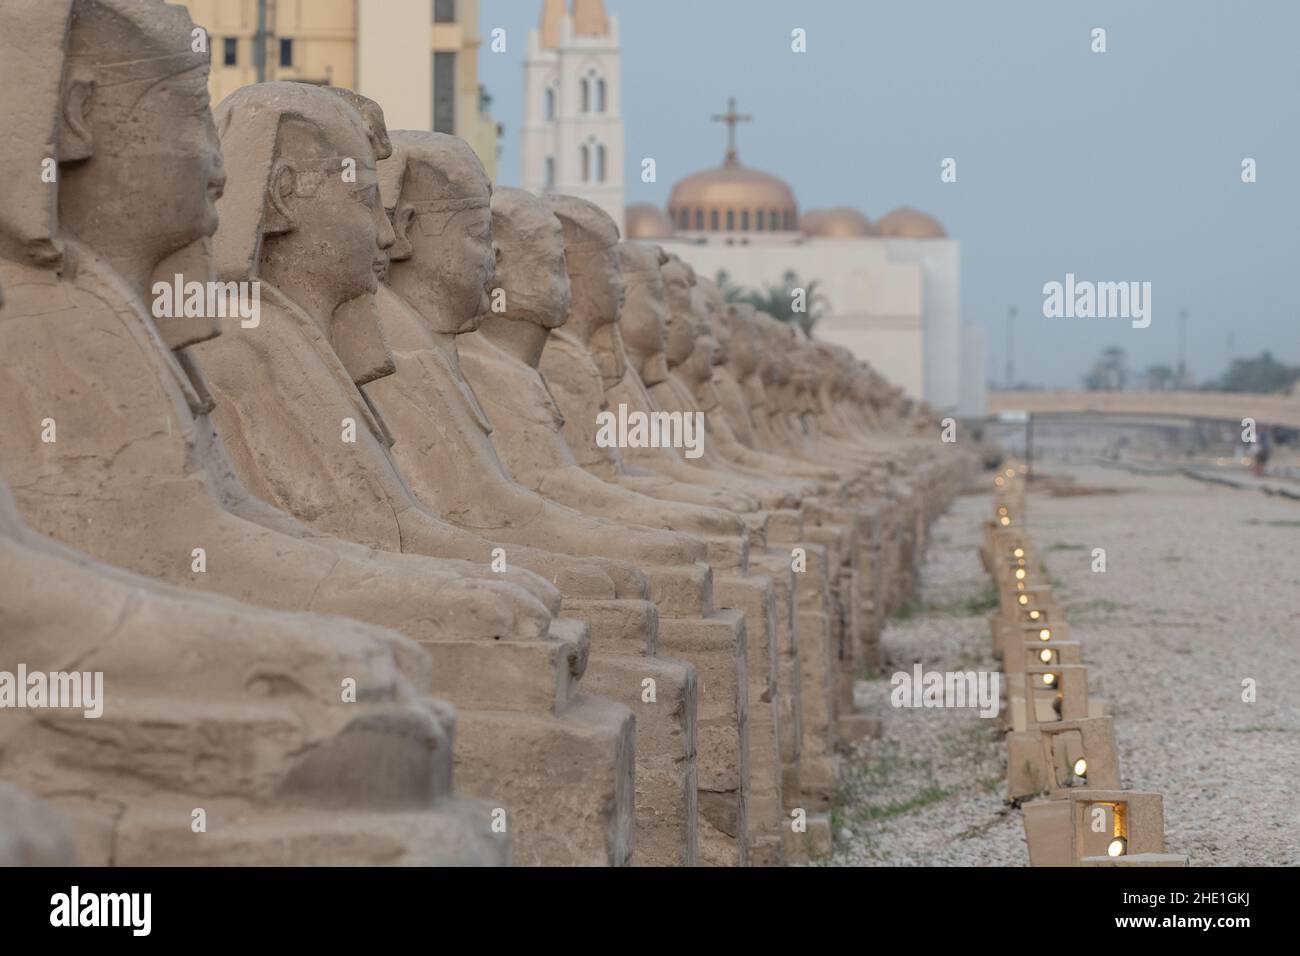 The ancient sphinx statues lining the avenue of sphinxes in Luxor, Egypt the historic road is lined with 100s of stone monuments. Stock Photo